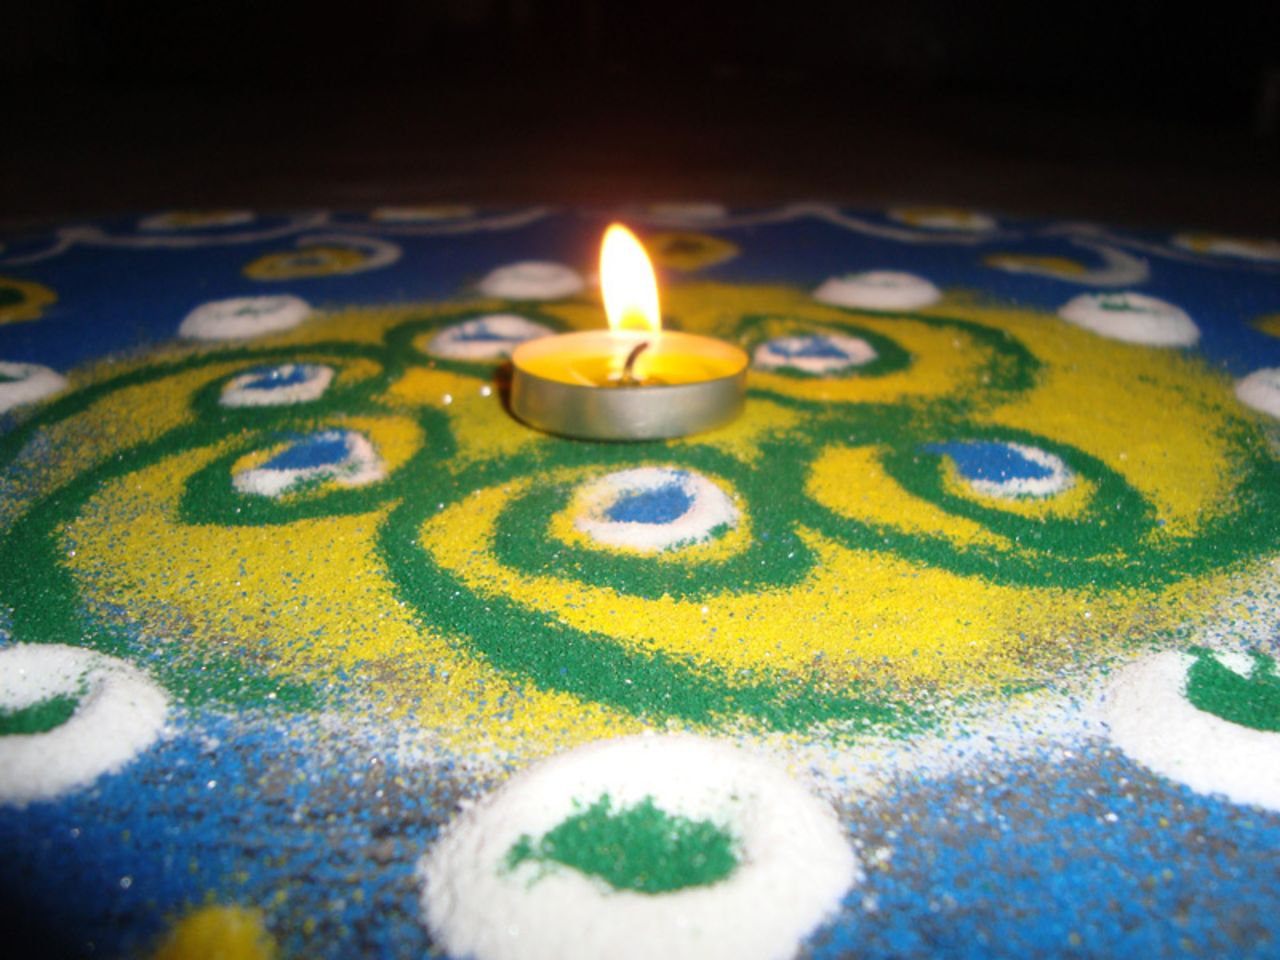 Diwali is a festival that provides the opportunity to celebrate life with colors as well as lights, says <a href="http://ireport.cnn.com/people/deadspirit6">Dinesh Thakur</a> of Pune, India. "It symbolizes victory of good over evil - light defeating darkness. It teaches us to have faith in the 'good' and not give into the darkness," he adds. He took this image of a single candle resting above a rangoli artwork to mark the start of this year's festival.